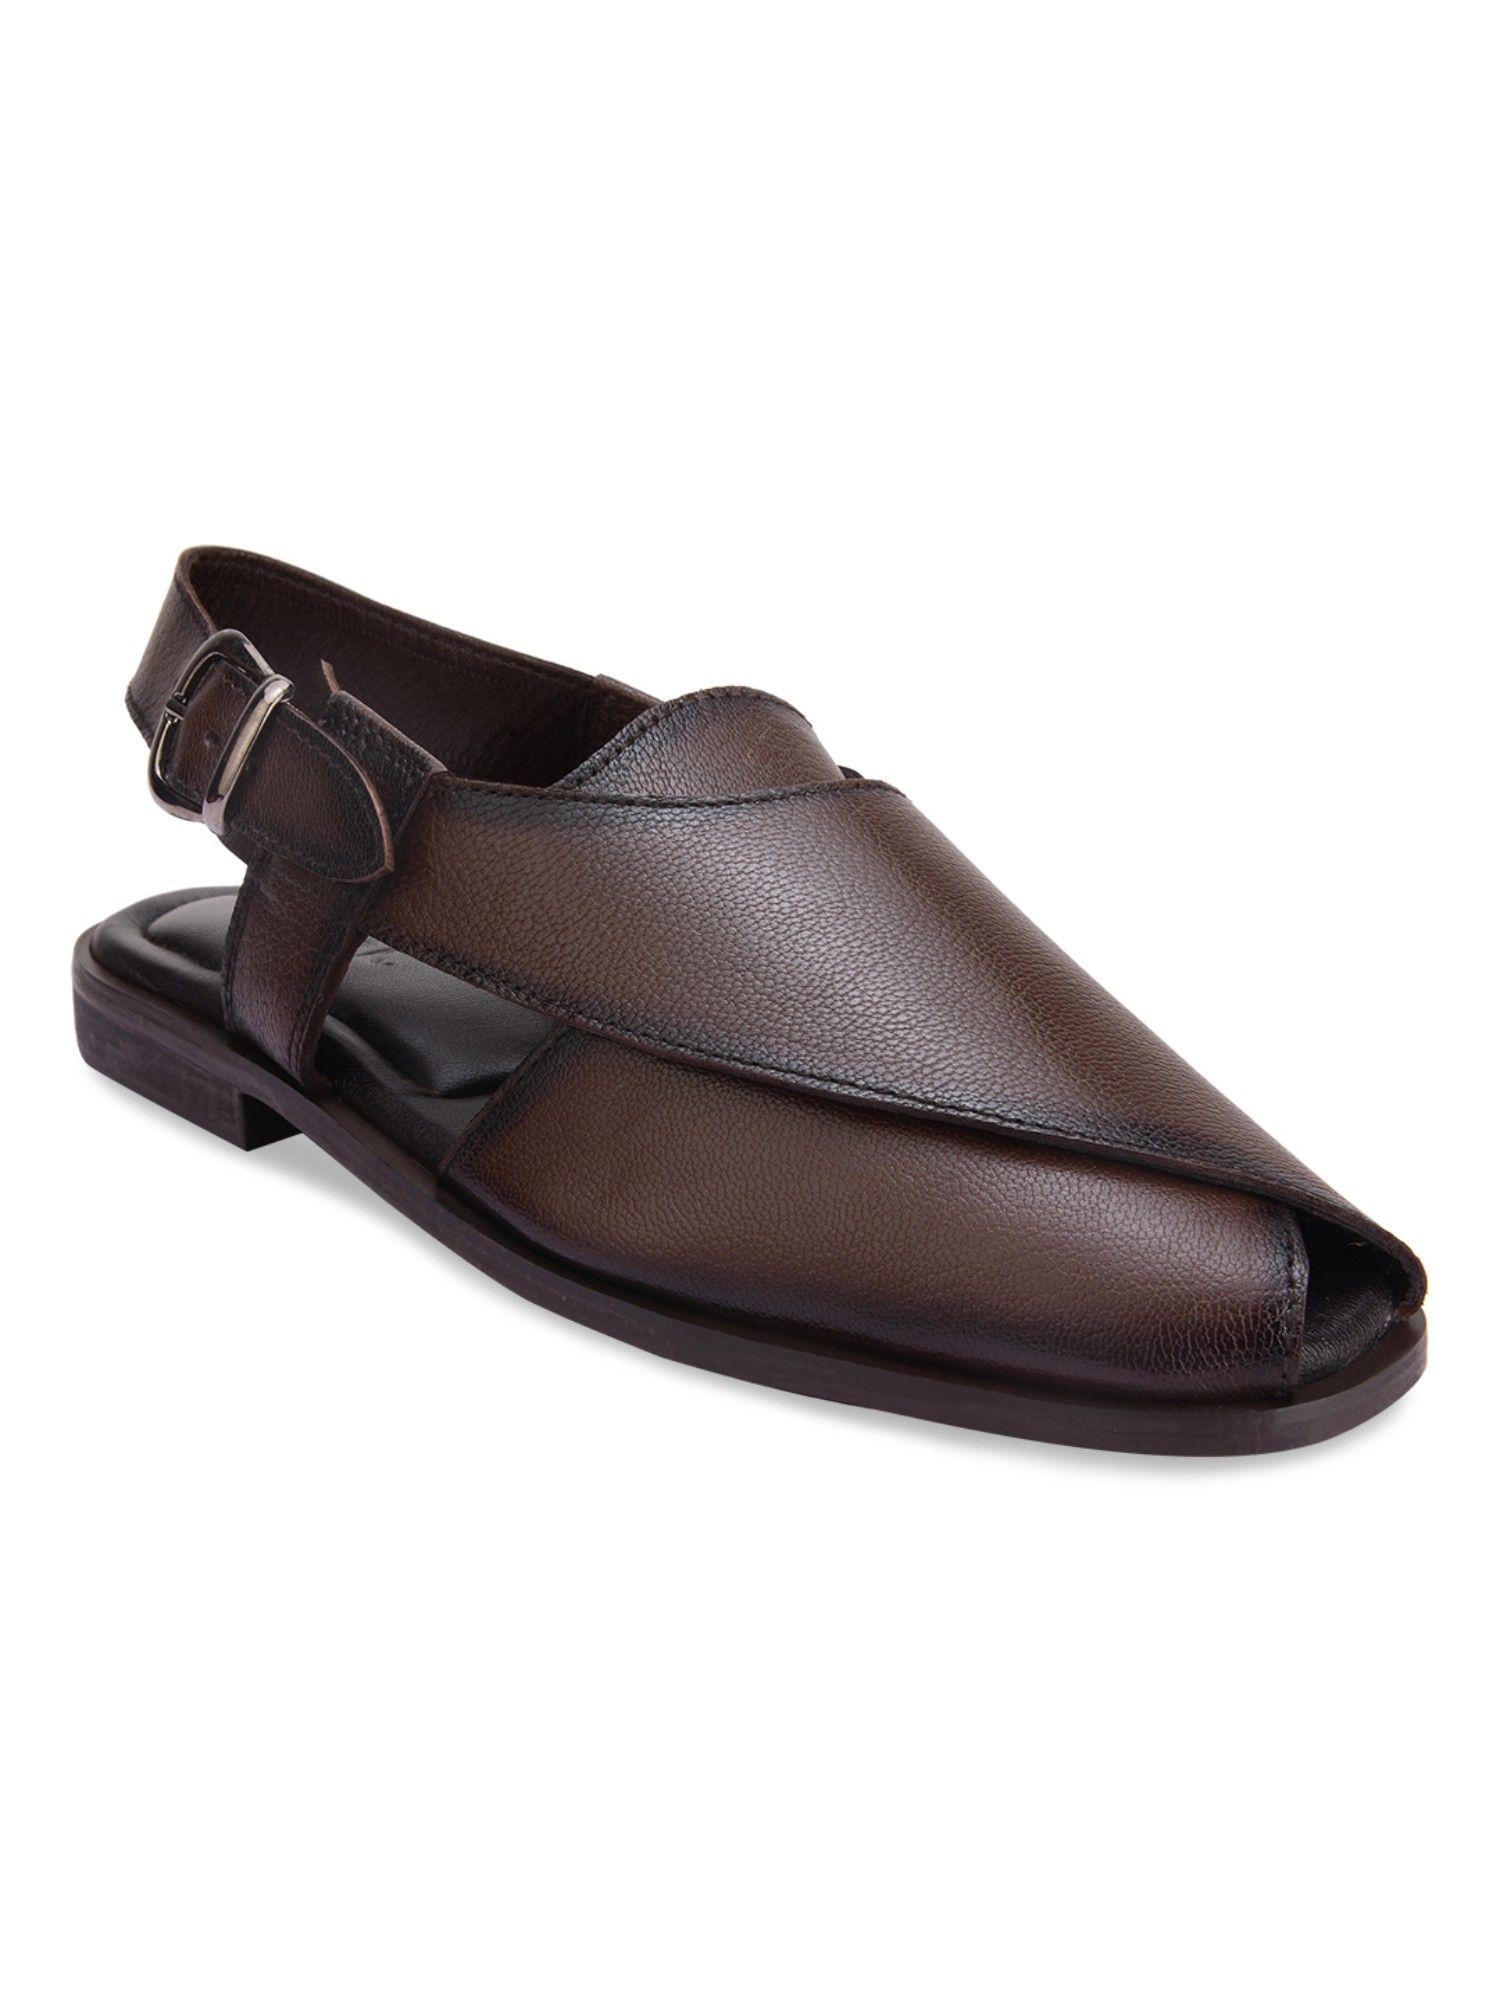 brown-men-solid-leather-ethnic-sandals